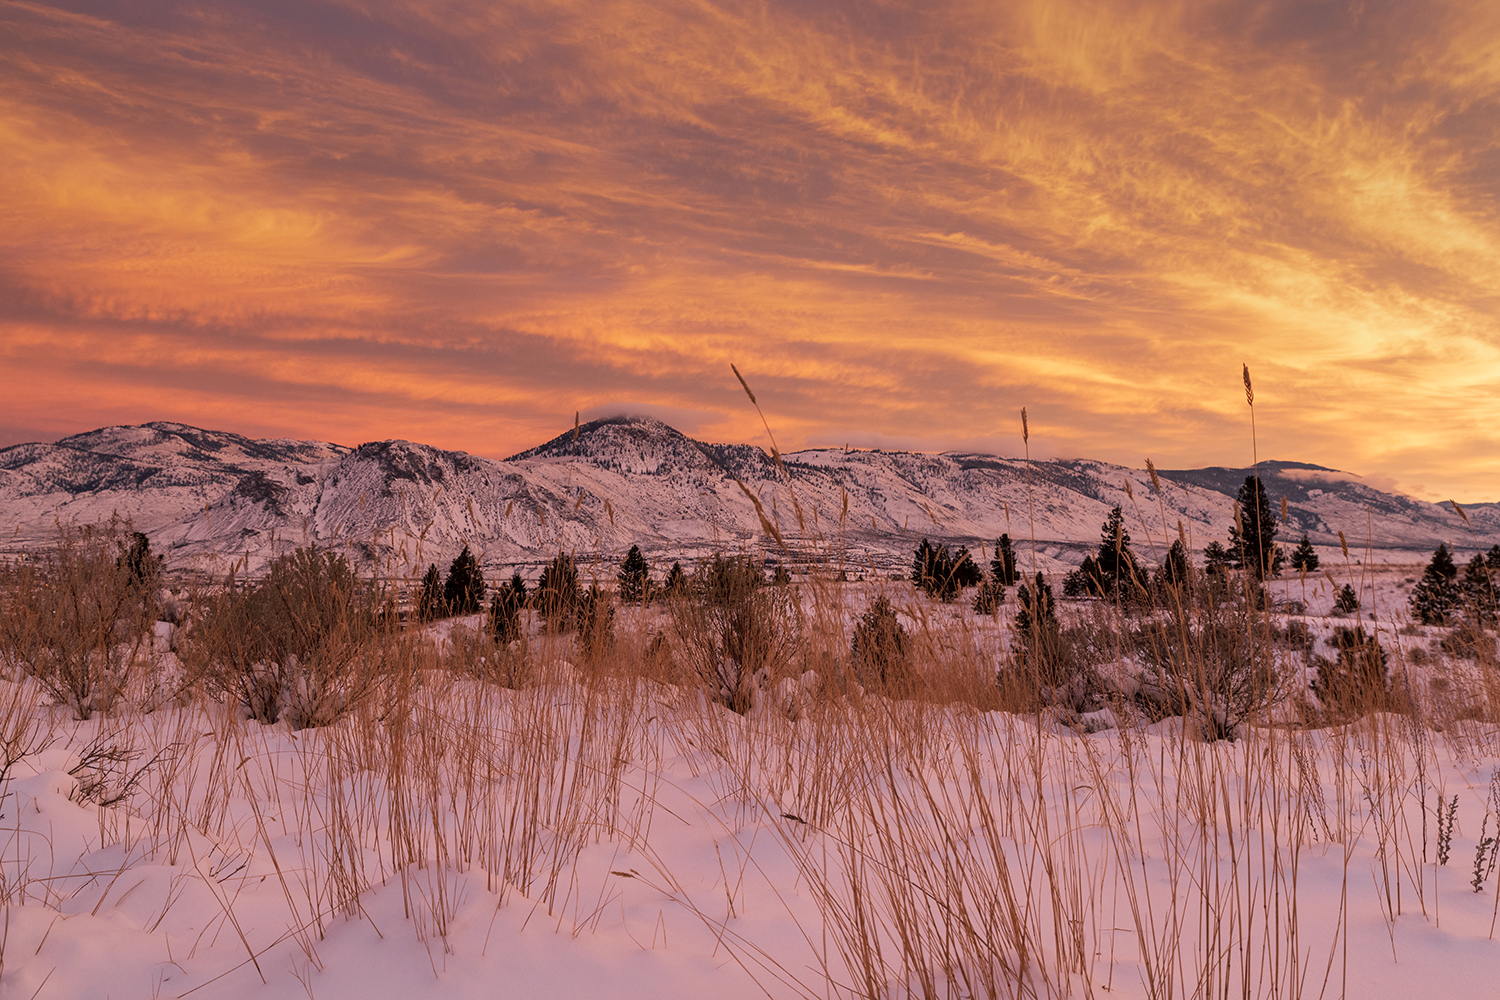 Kamloops Landscape yellow and orange sky with clouds and mountain with snow